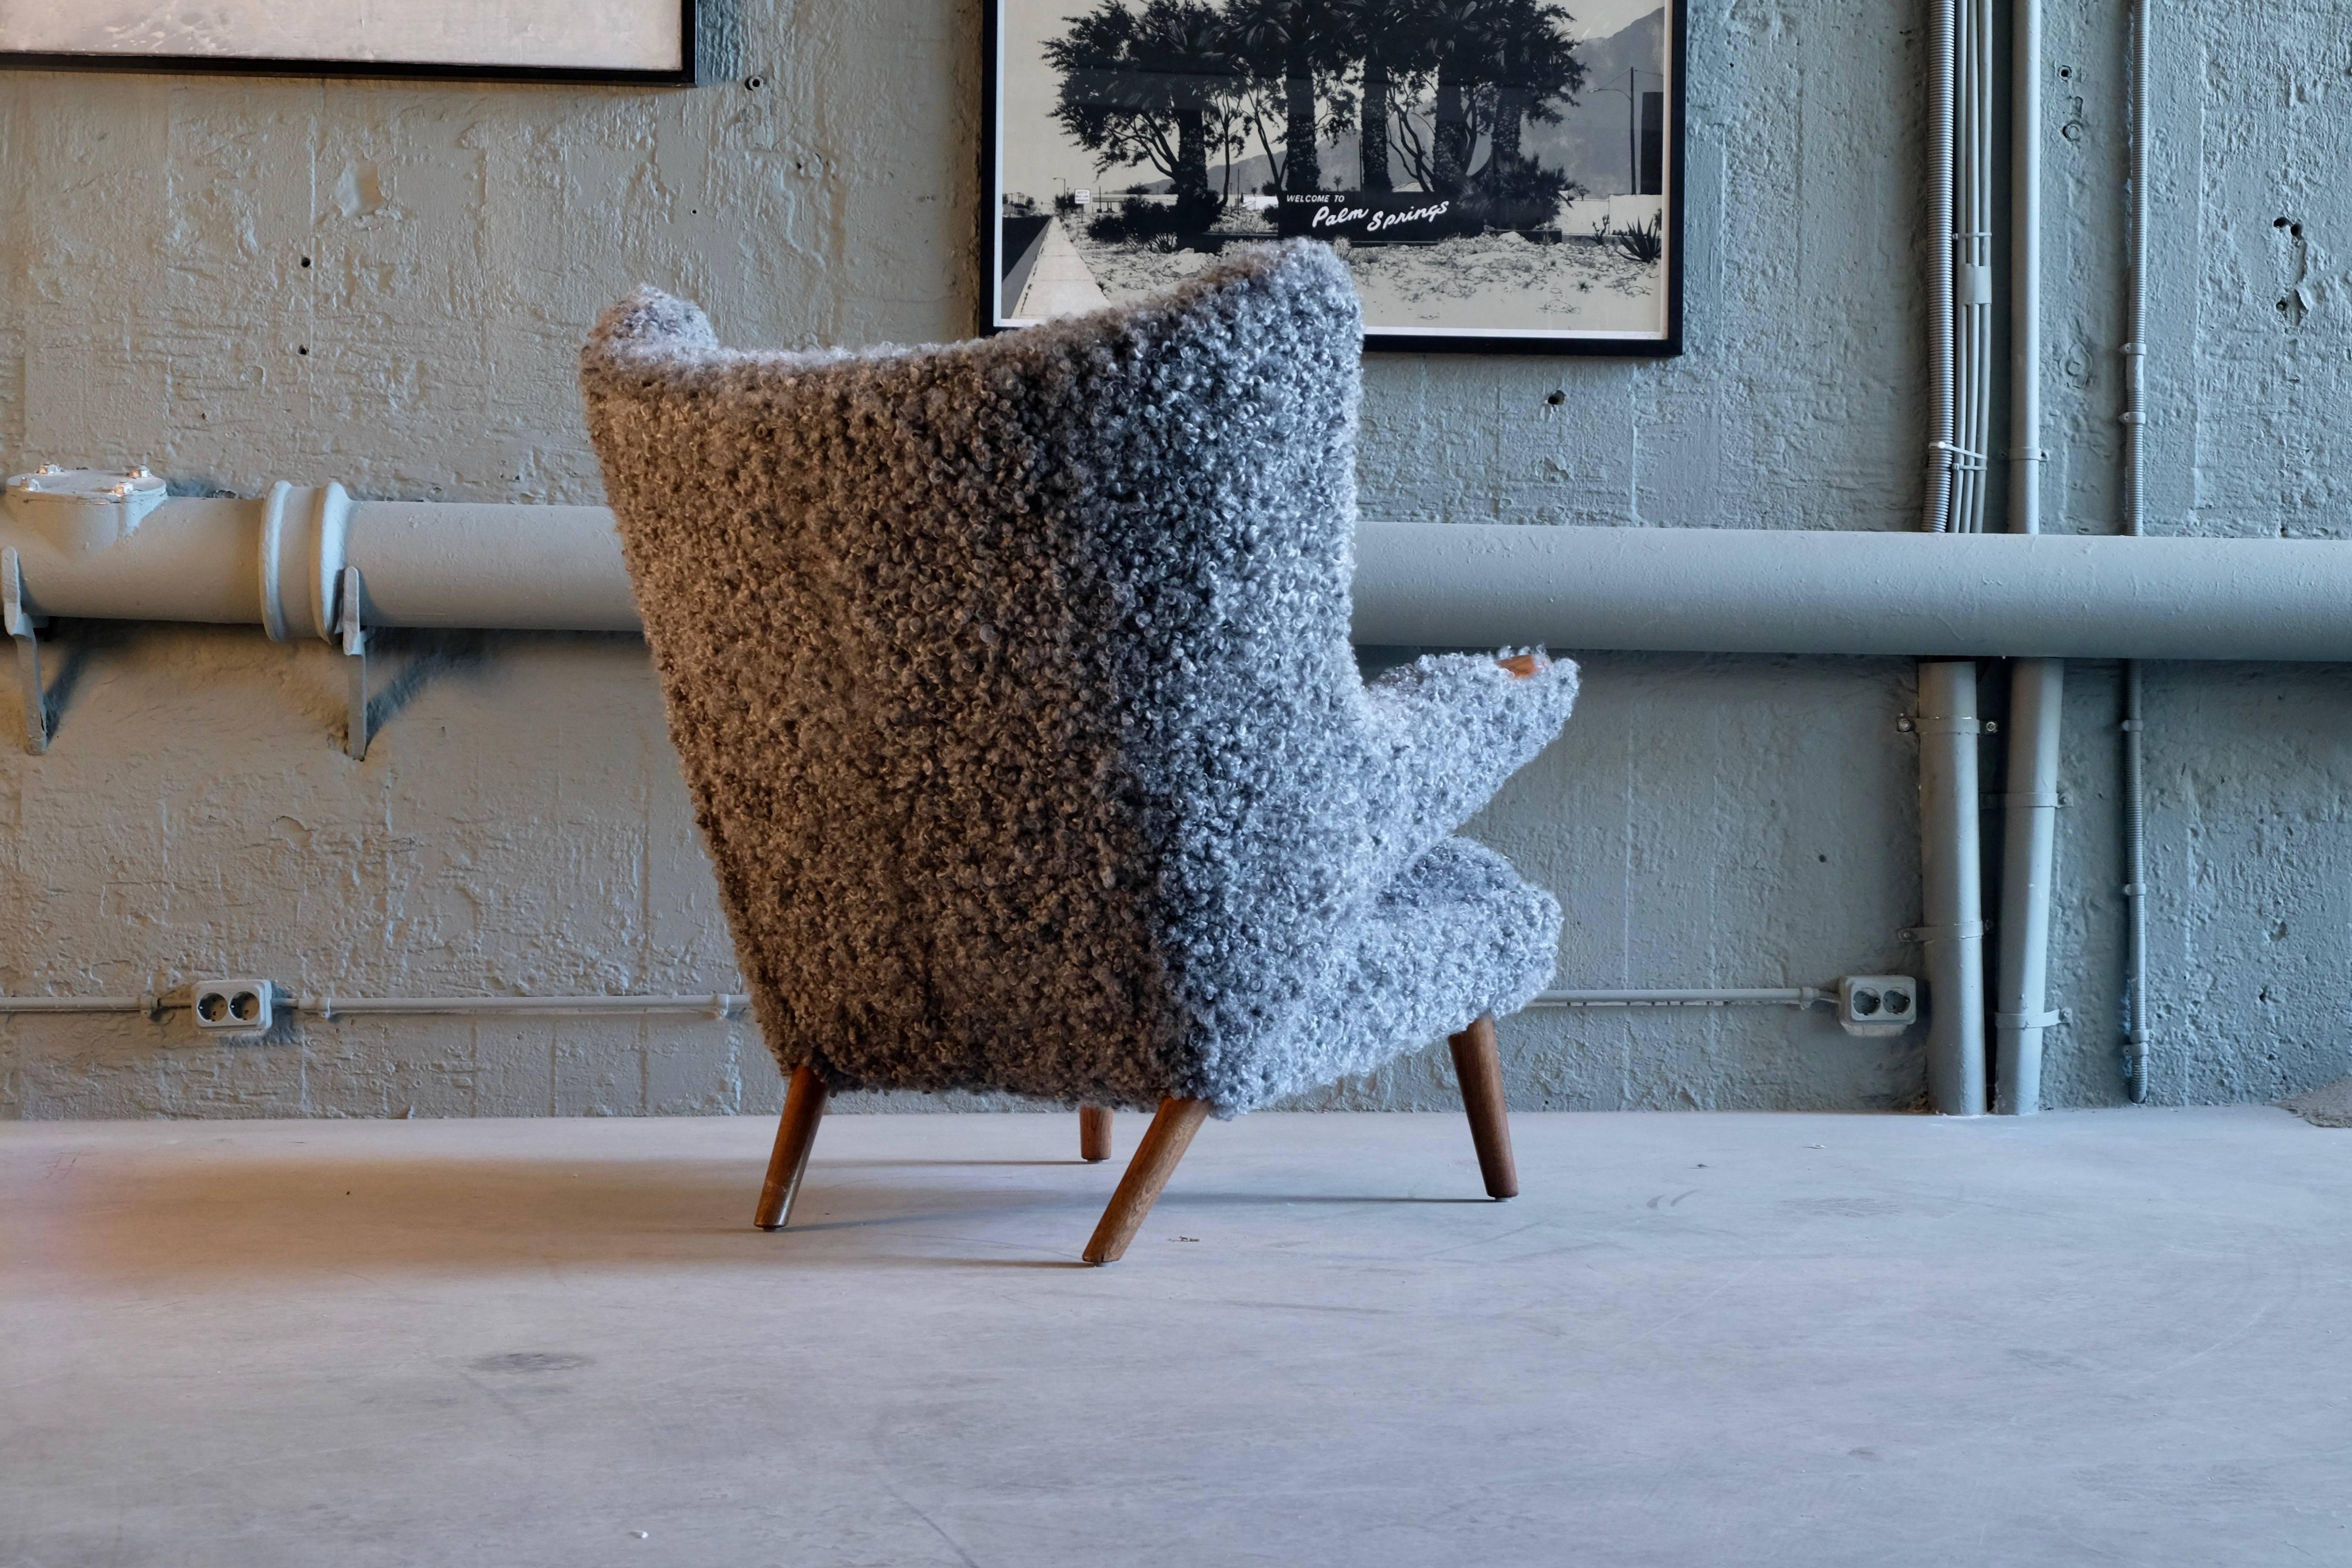 Upholstered in natural colored sheepskin.
Great condition. Produced by A.P. Stolen in Denmark.